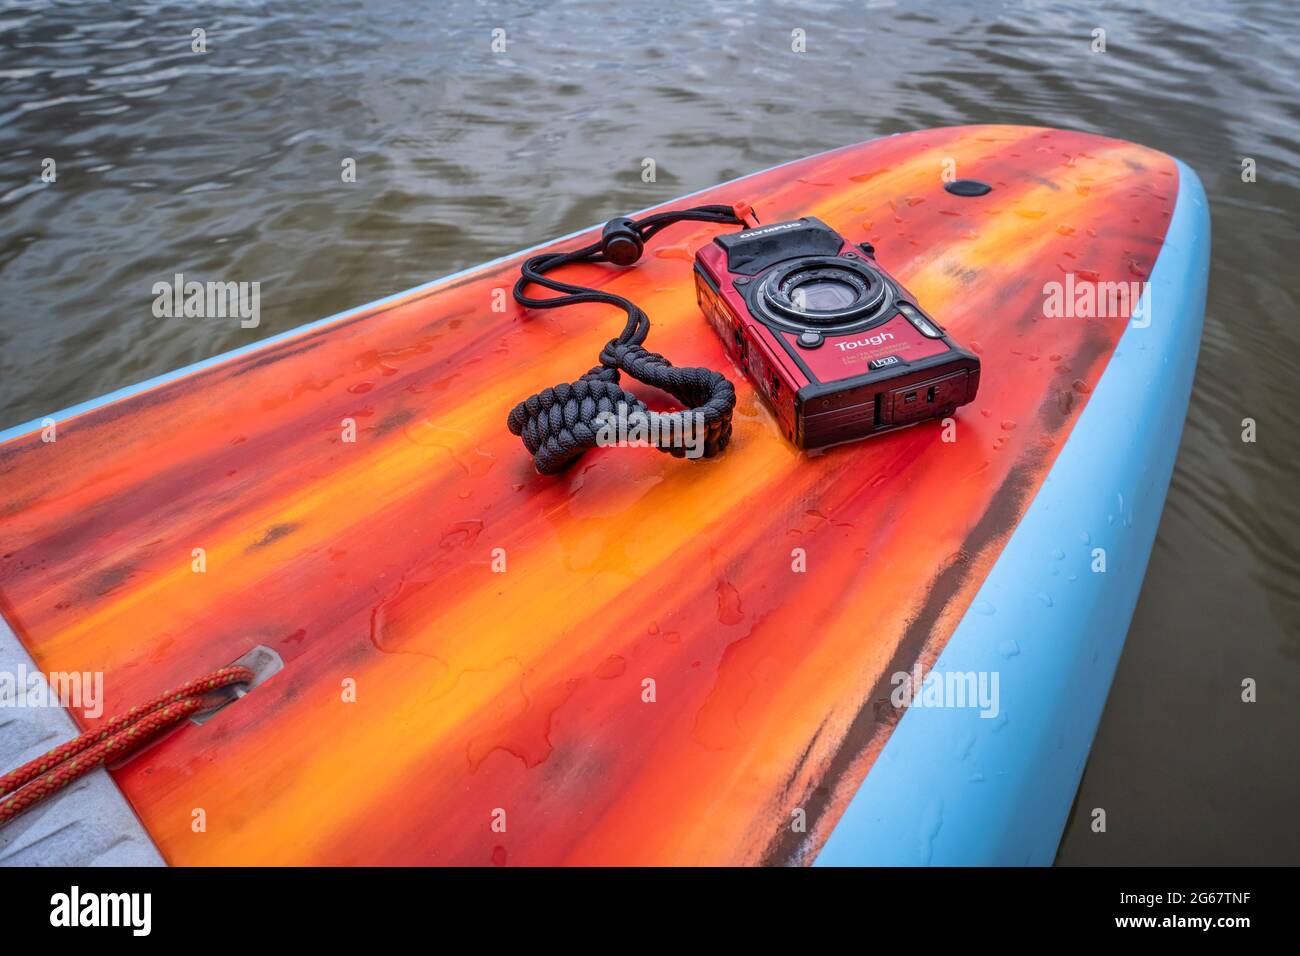 Fort Collins, CO, USA - May 9, 2021: Compact, waterproof Olympus Stylus Tough TG-5 camera on a rear deck of a stand up paddleboard by Mistral. Stock Photo